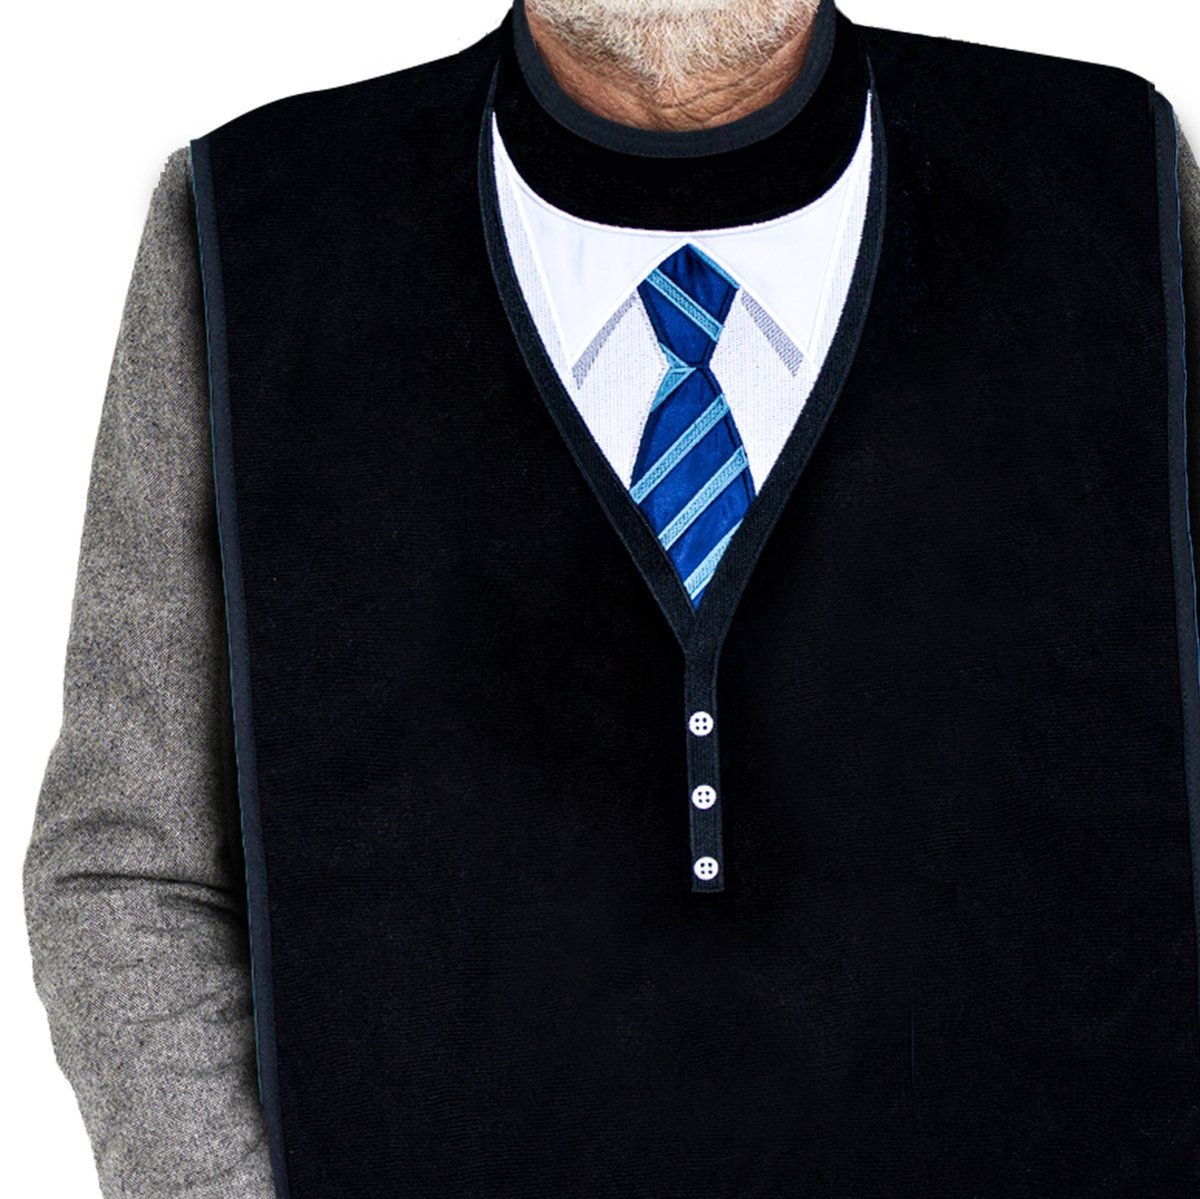 Men's Dress 'n Dine™ Adult Bibs with Sweater and Tie & Tuxedo (2 Pack) - Classy Pal Dress 'n Dine Adult Bibs